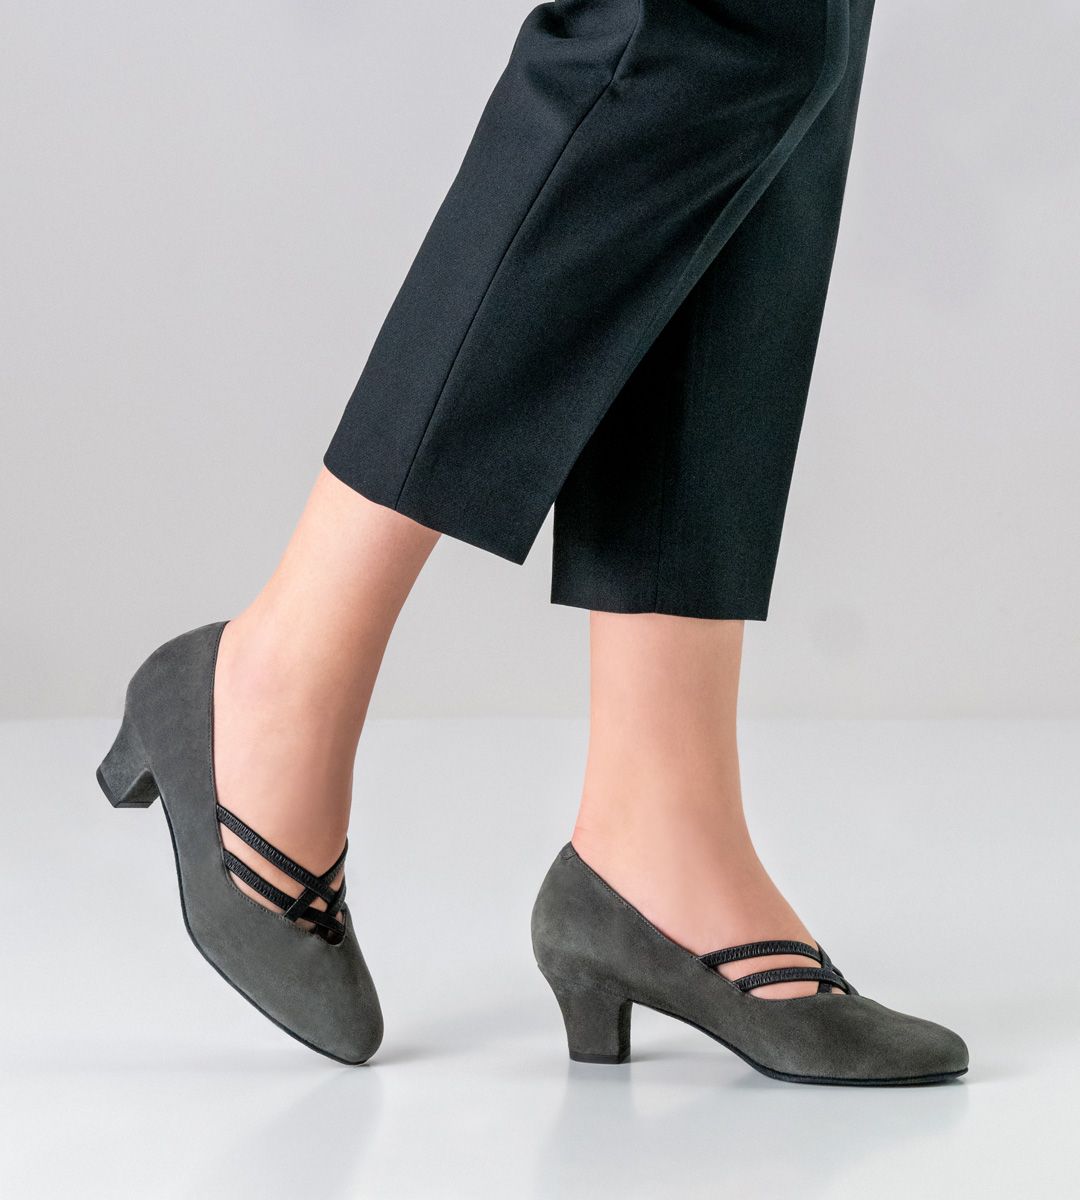 Werner Kern Anke Ladies Ballroom Shoes in Grey Suede with Criss Cross Detail Above Toebed